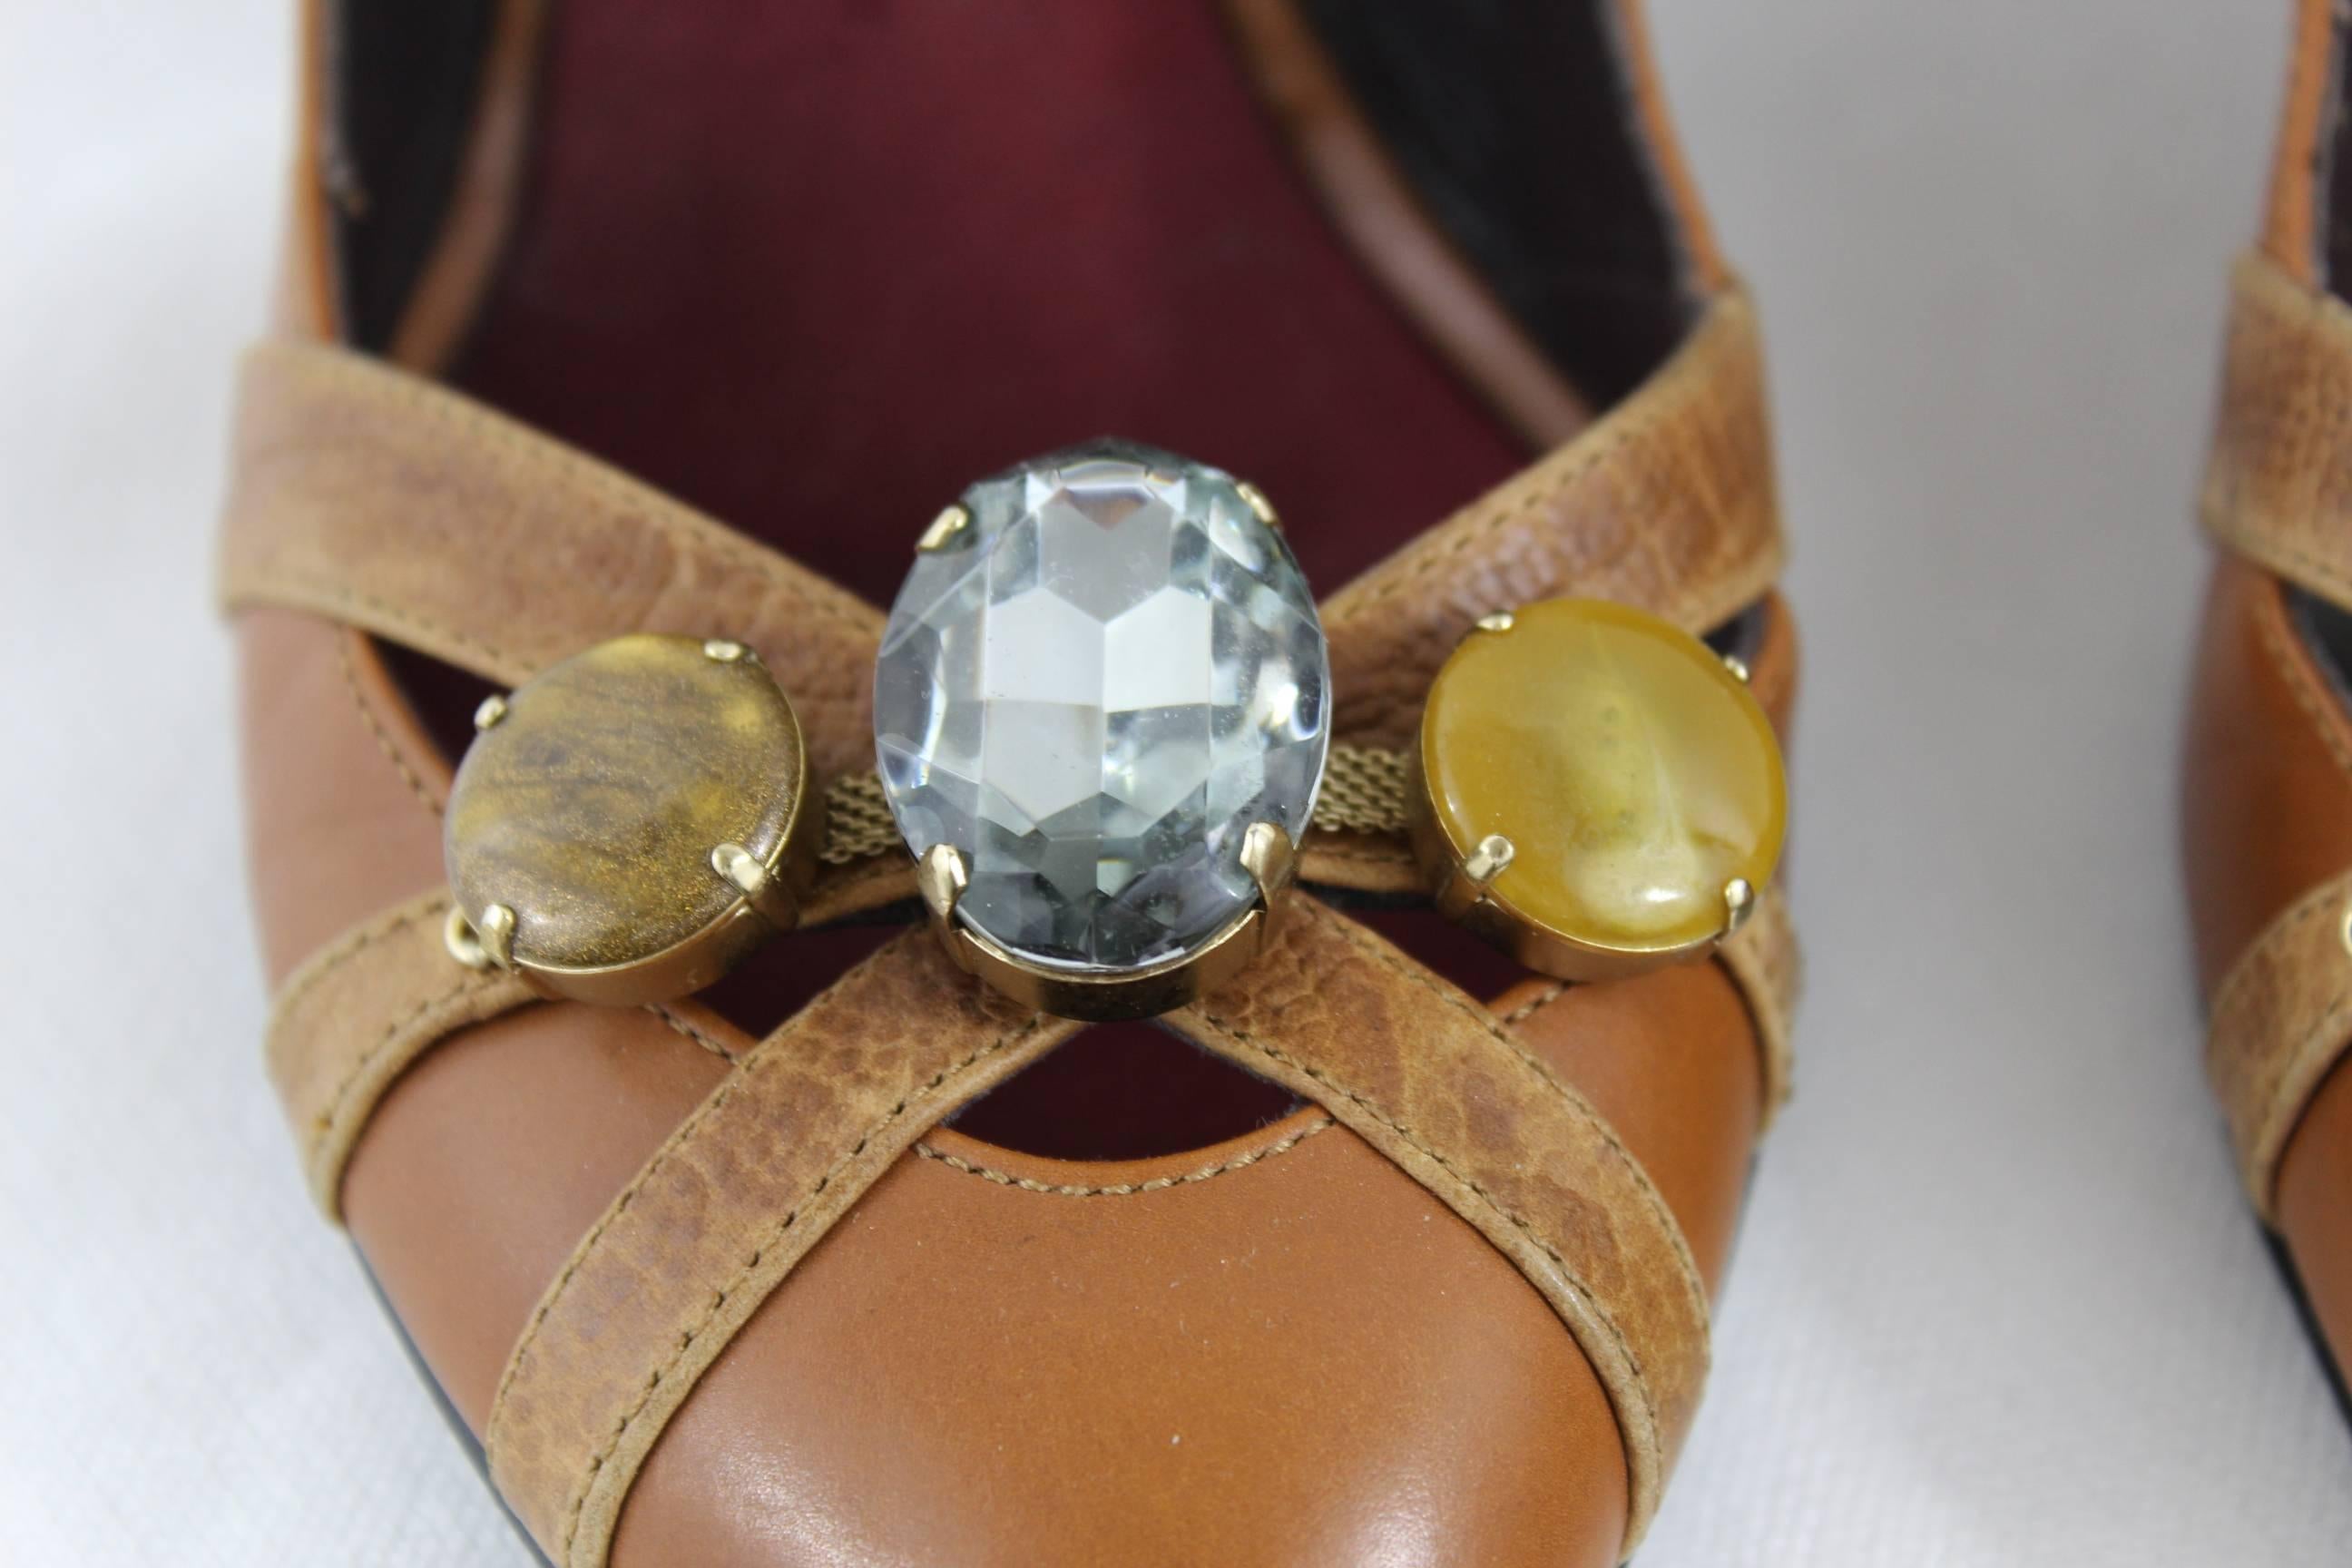 Brown Nice pair of Giuseppe Zanotti High Heel Shoes with Stones For Sale